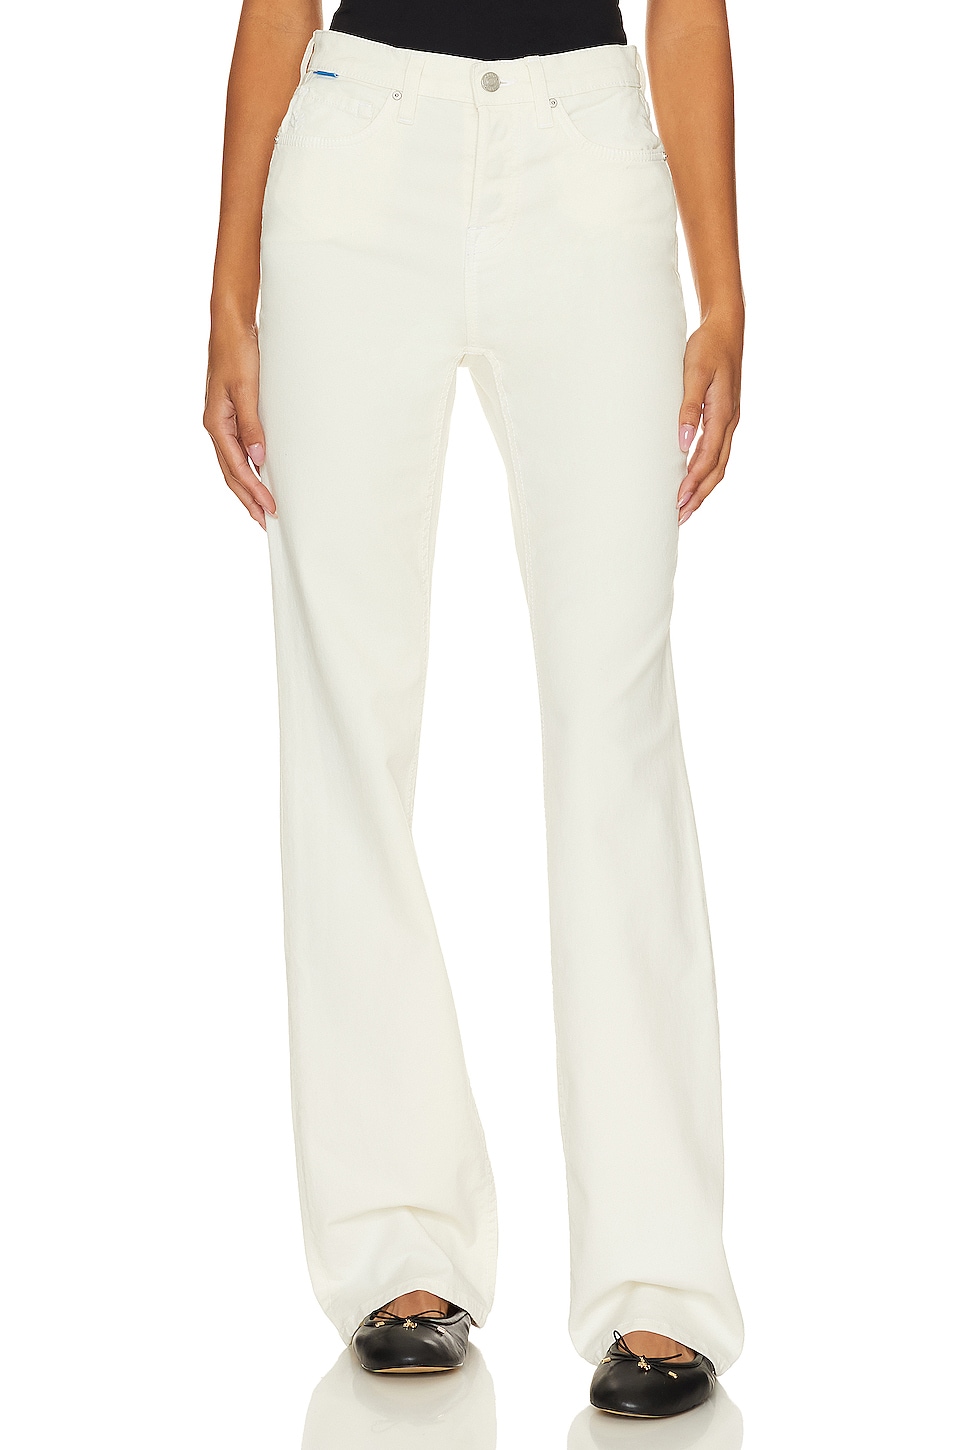 Perfect Moment Aurora Flare Race Pant in Snow White